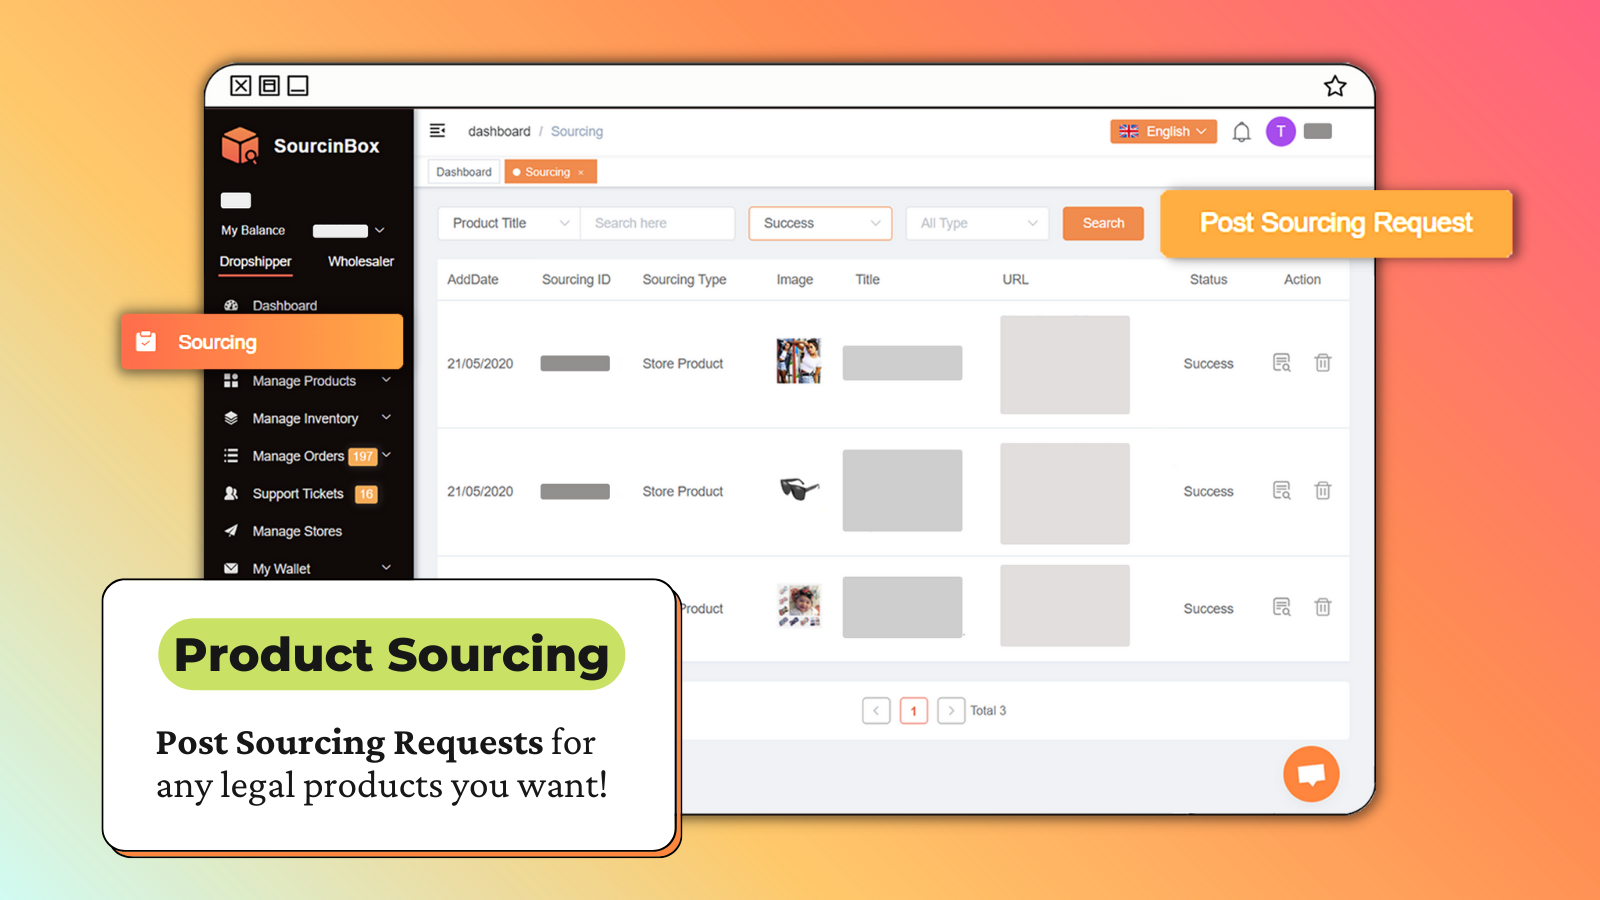 sourcinbox product sourcing